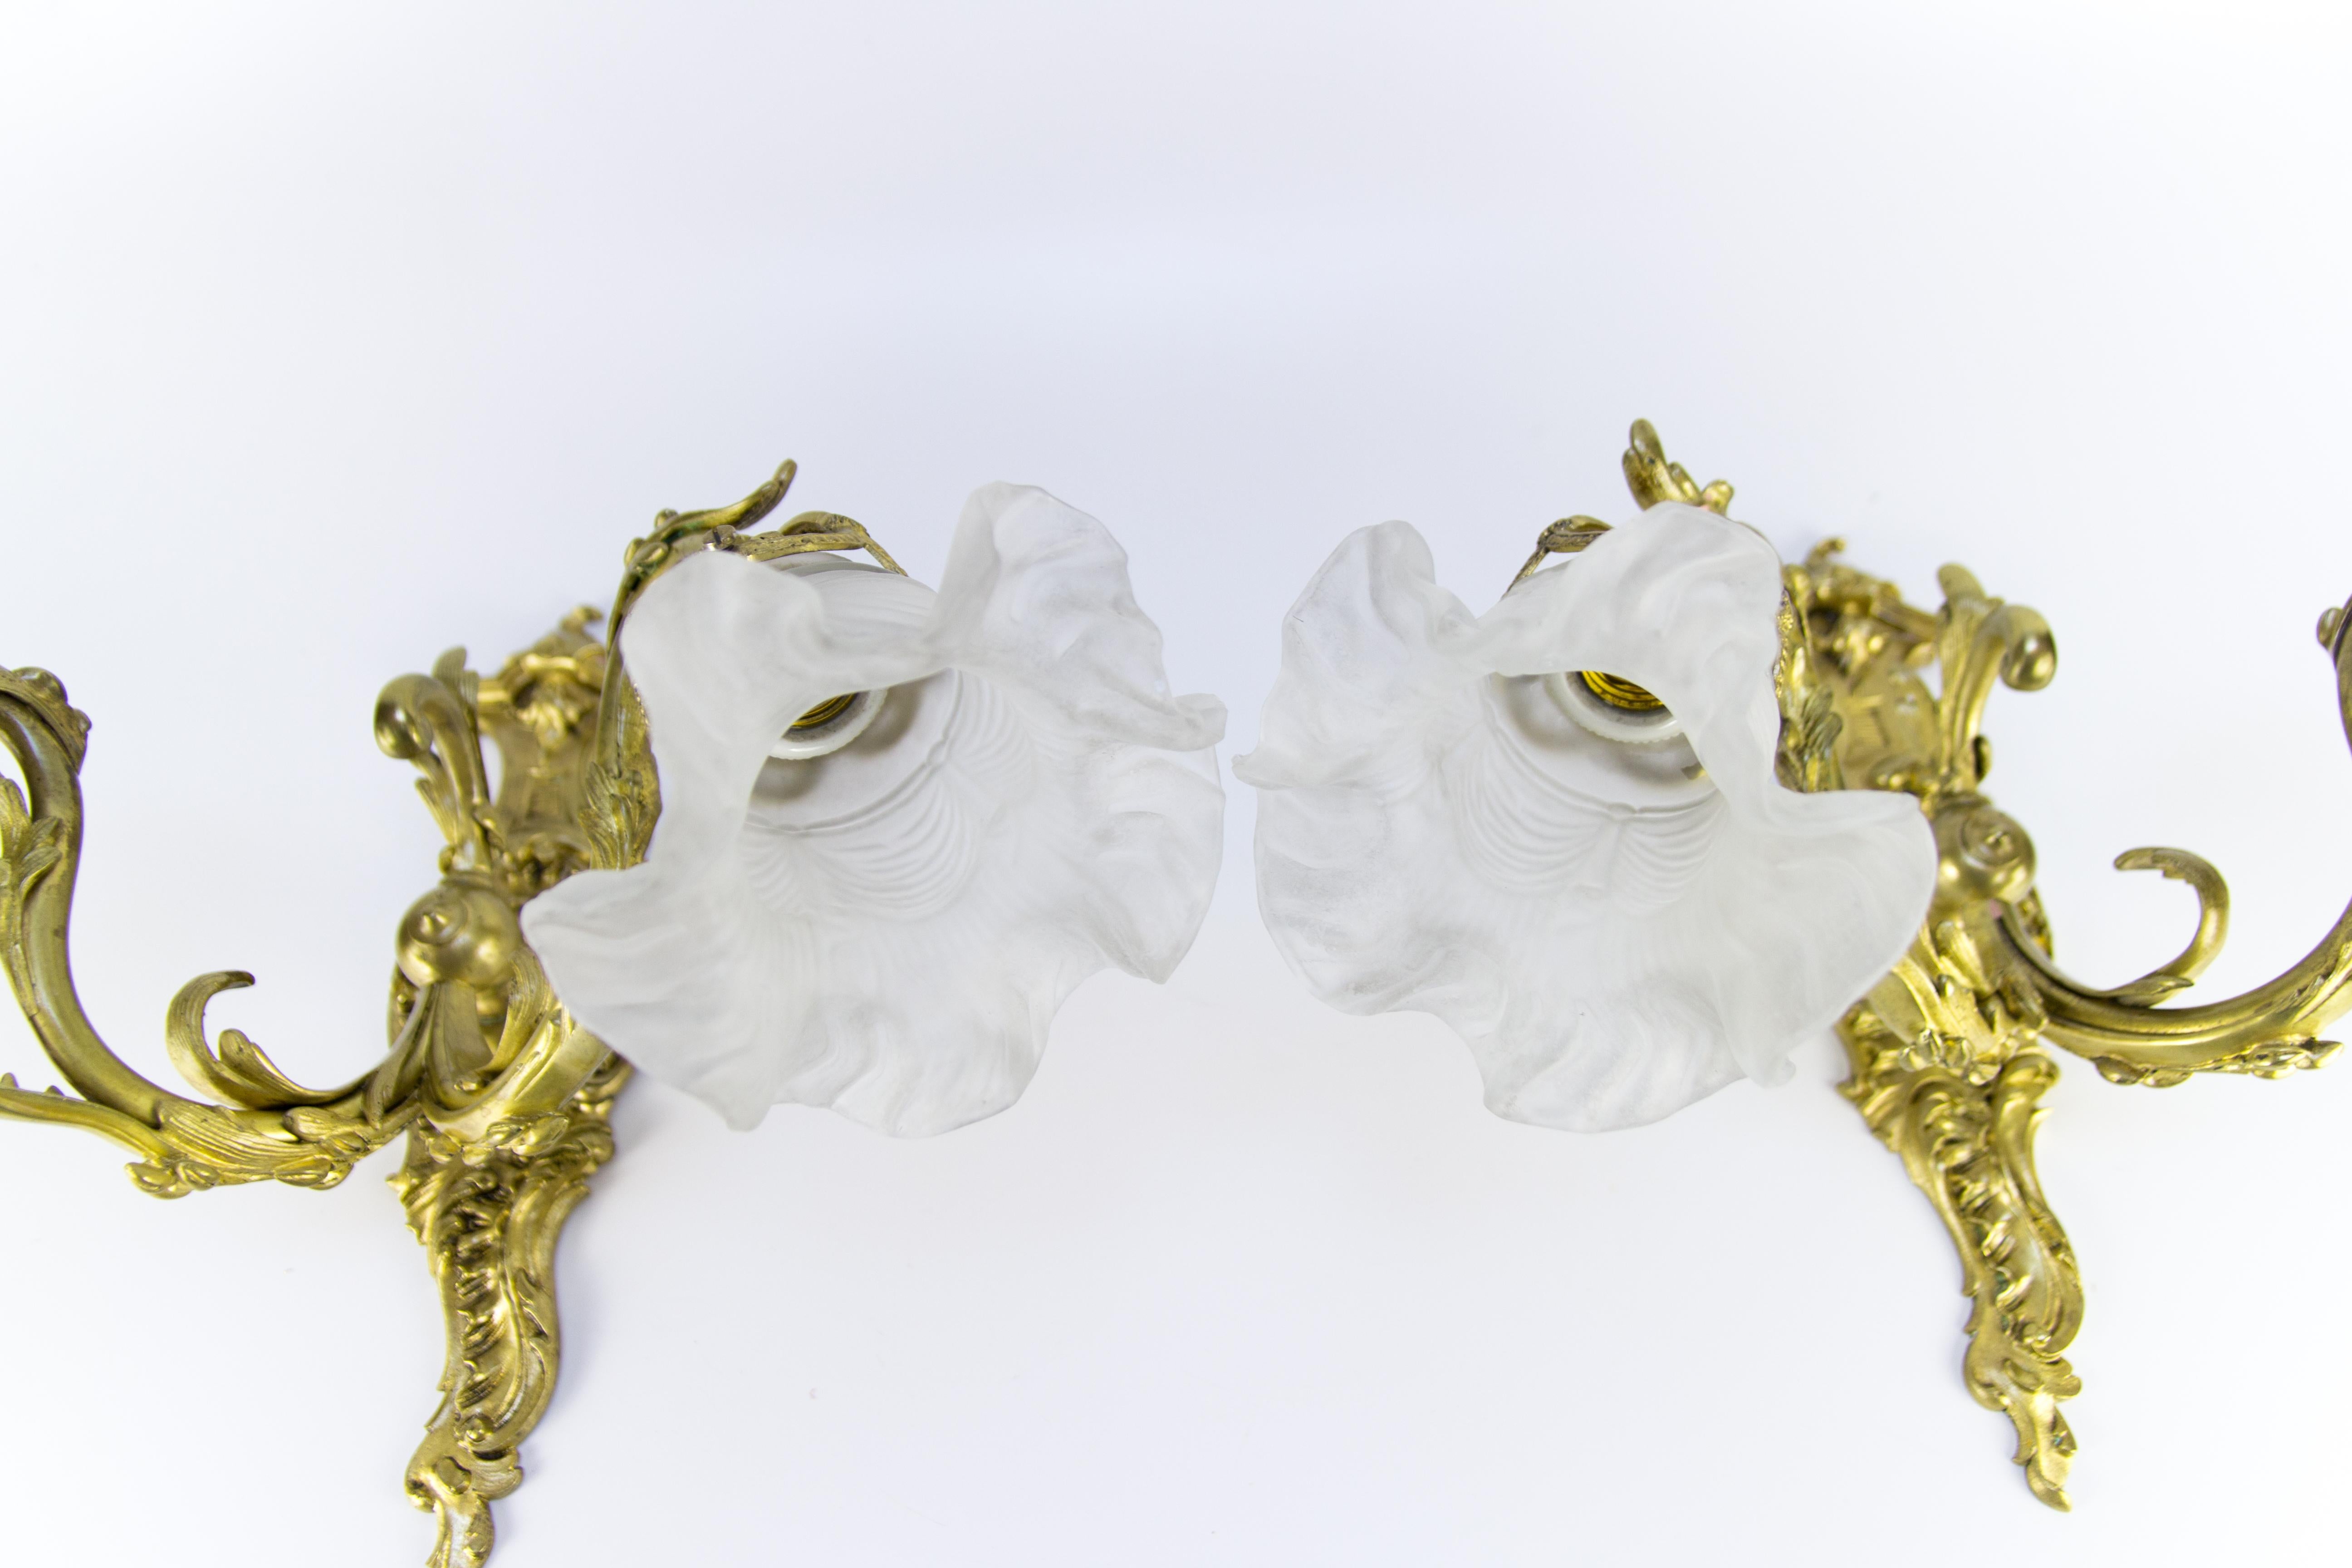 Pair of French Rococo style bronze sconces from the 1920s. Beautiful Rococo ornate details. Each sconce has two bronze arms and frosted glass shades, each with E27 (E26) size light bulb sockets.
Measures: Height 35 cm / 13.7 in; width 48 cm / 18.9